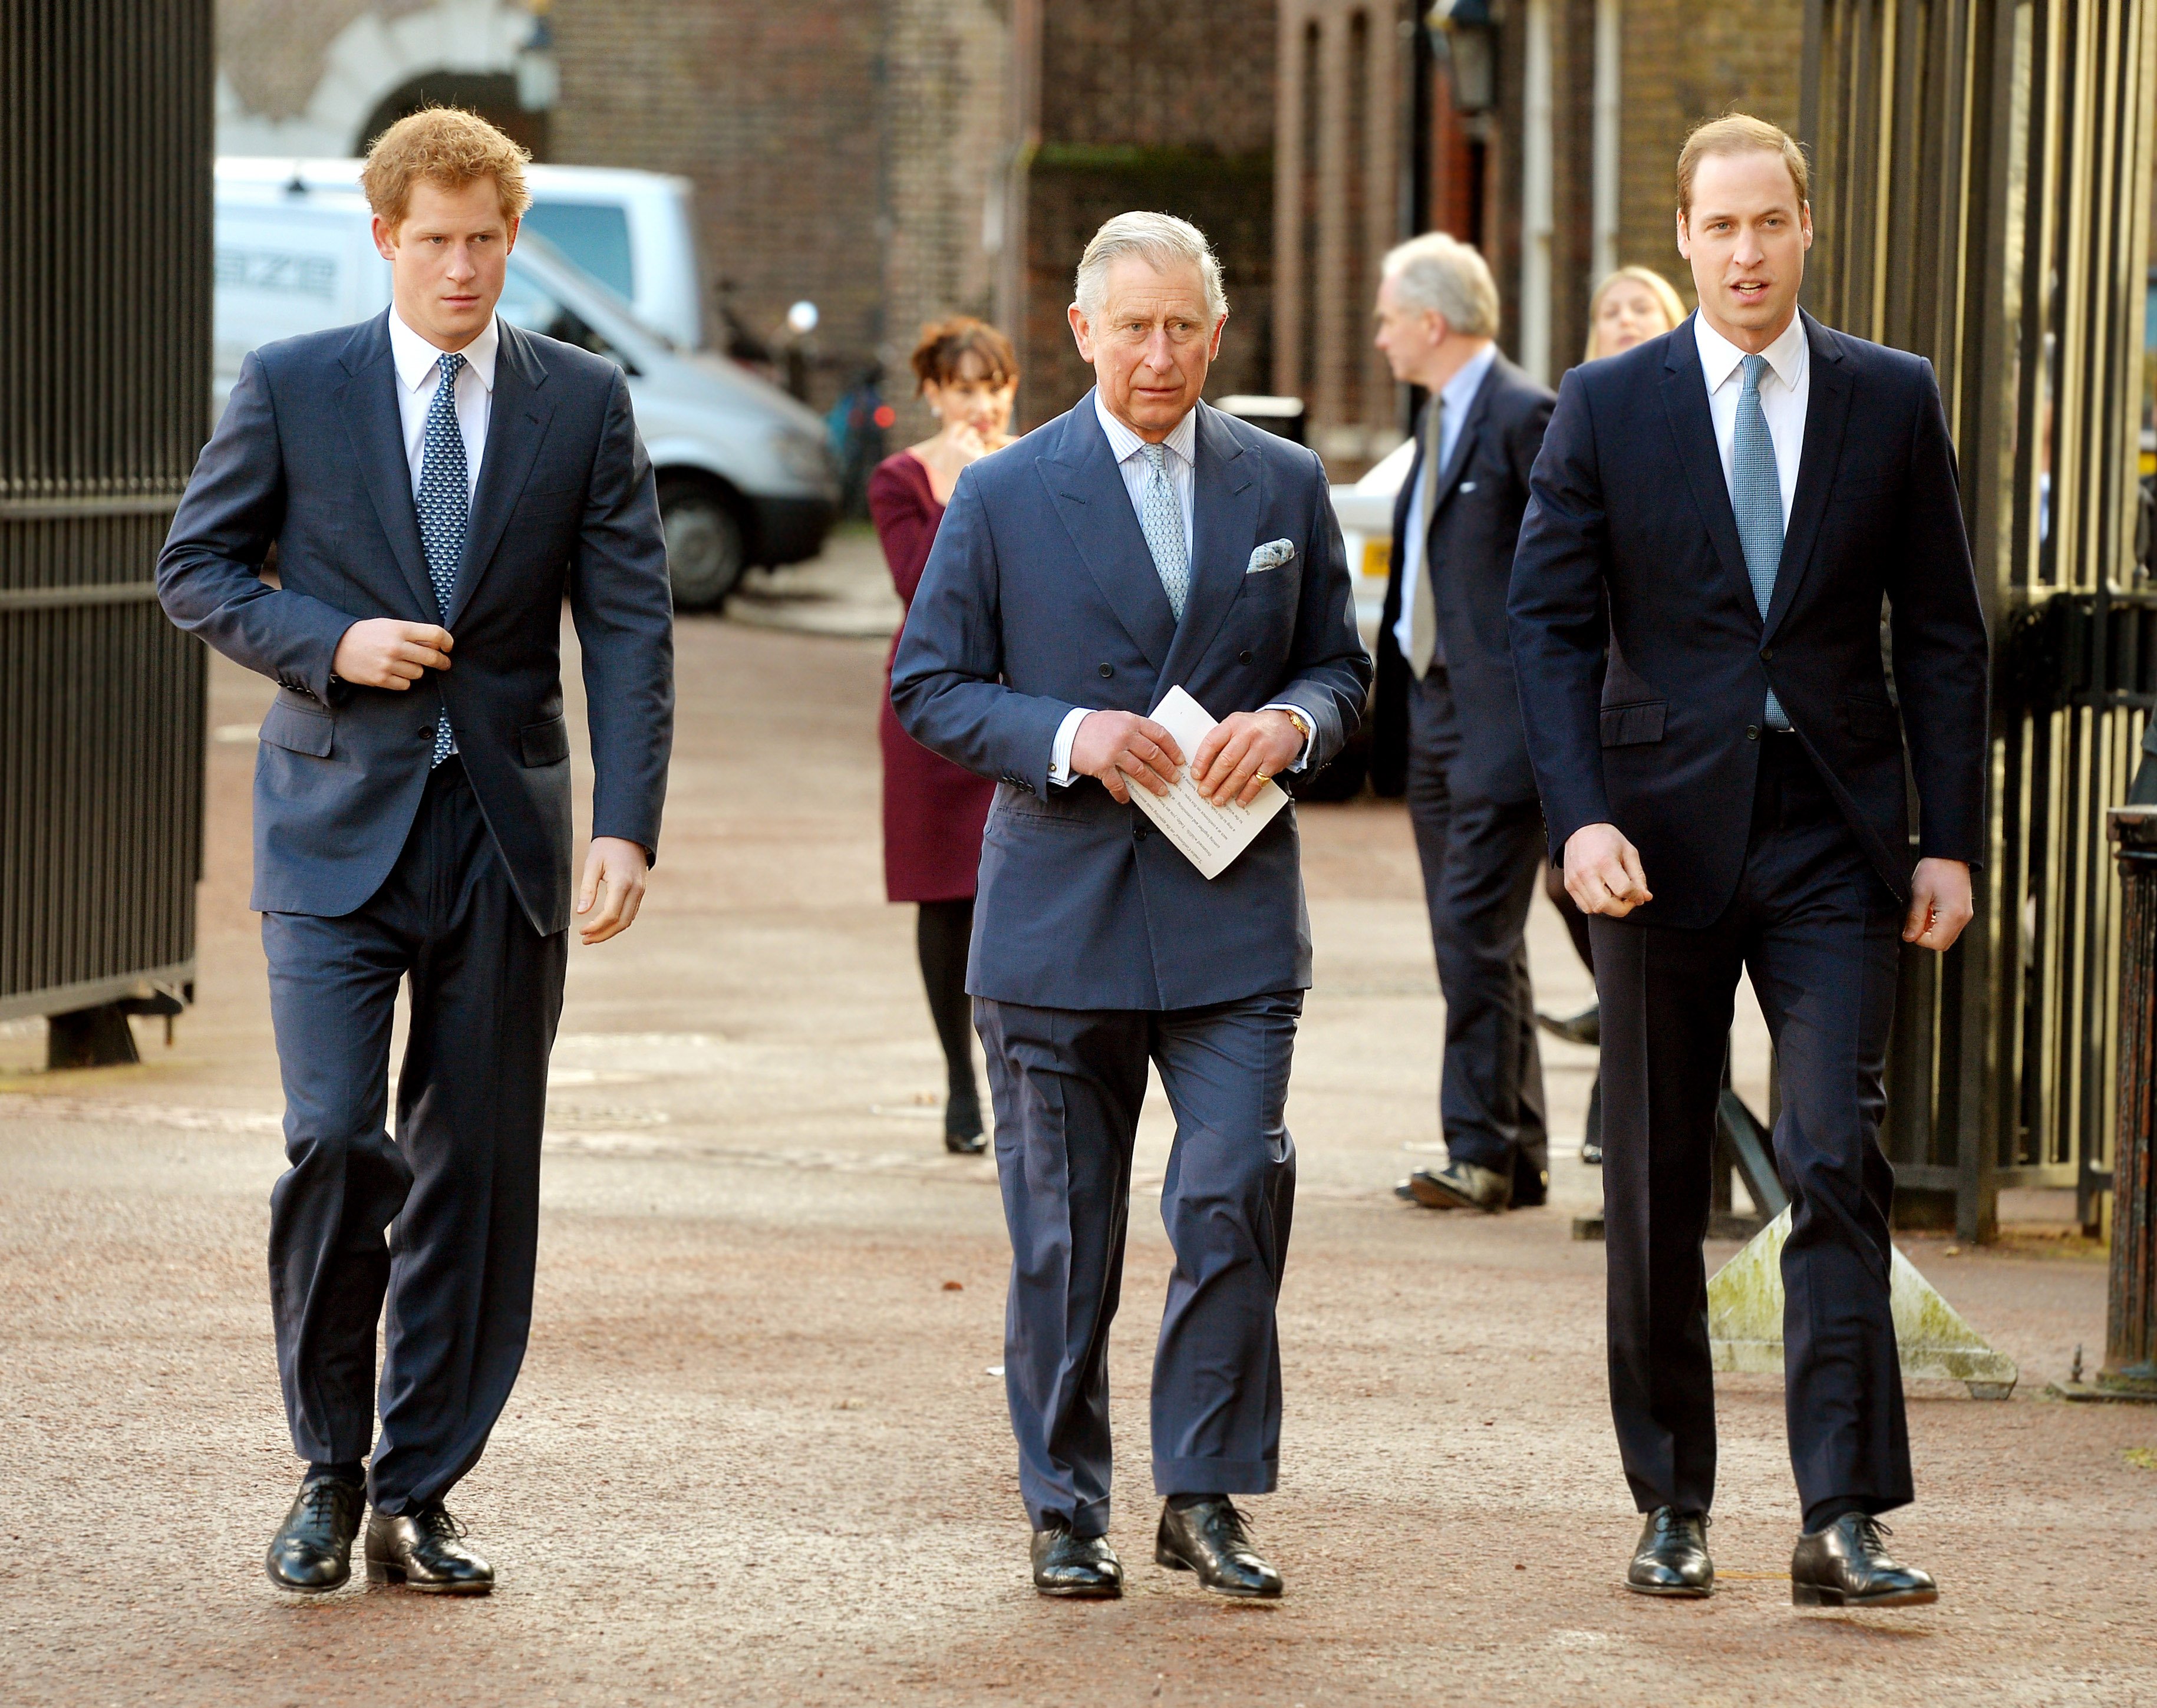 Prince Harry, King Charles III, and Prince William arrive at the Illegal Wildlife Trade Conference at Lancaster House on February 13, 2014, in London, England. | Source: Getty Images